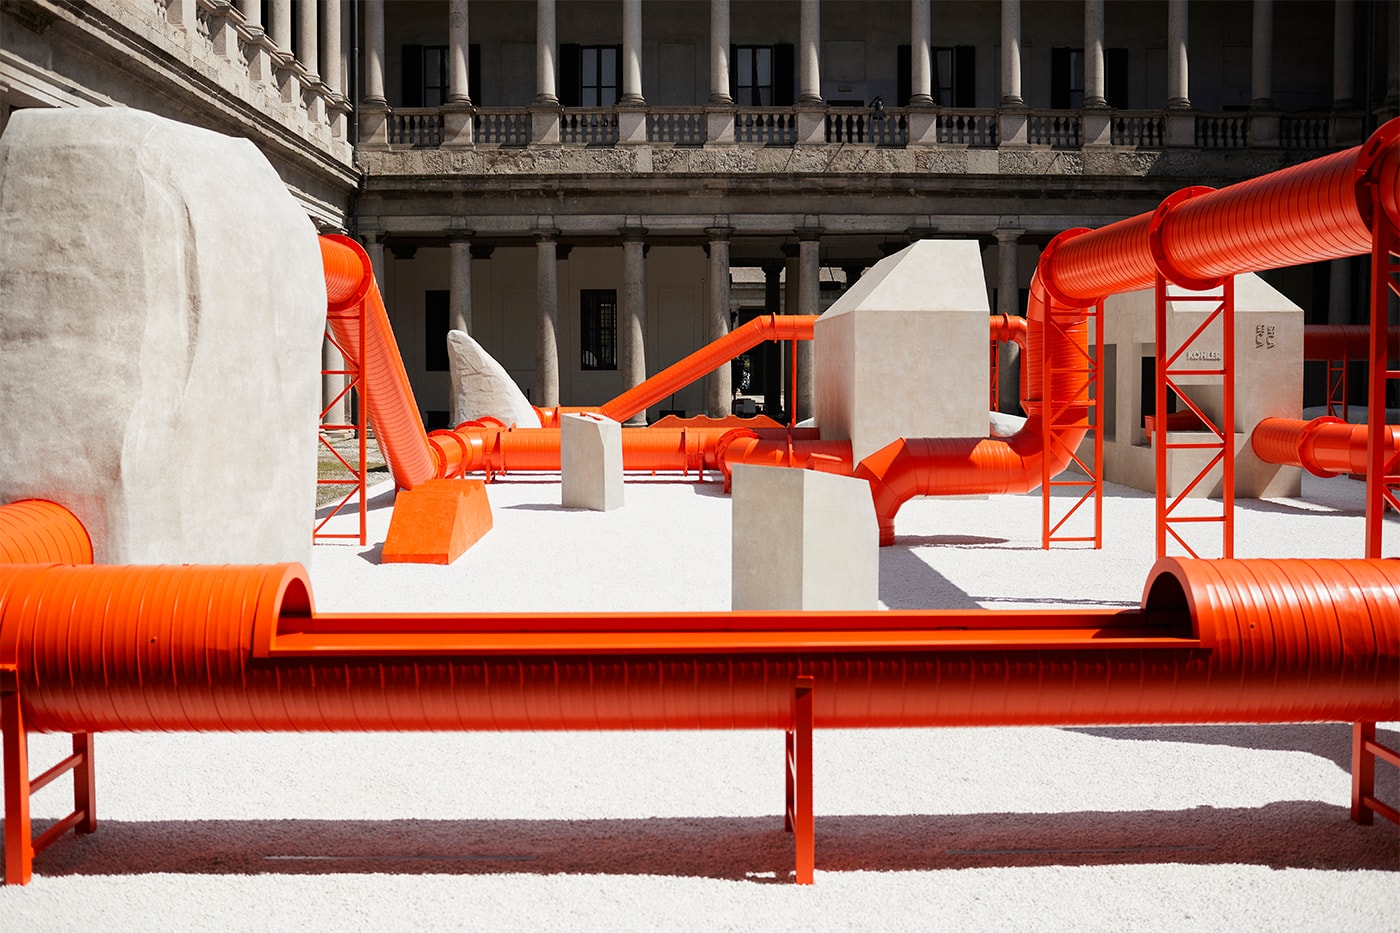 Samuel Ross Creates a Brutalist-Inspired Maze of Orange Pipes Inside an Italian Palazzo 